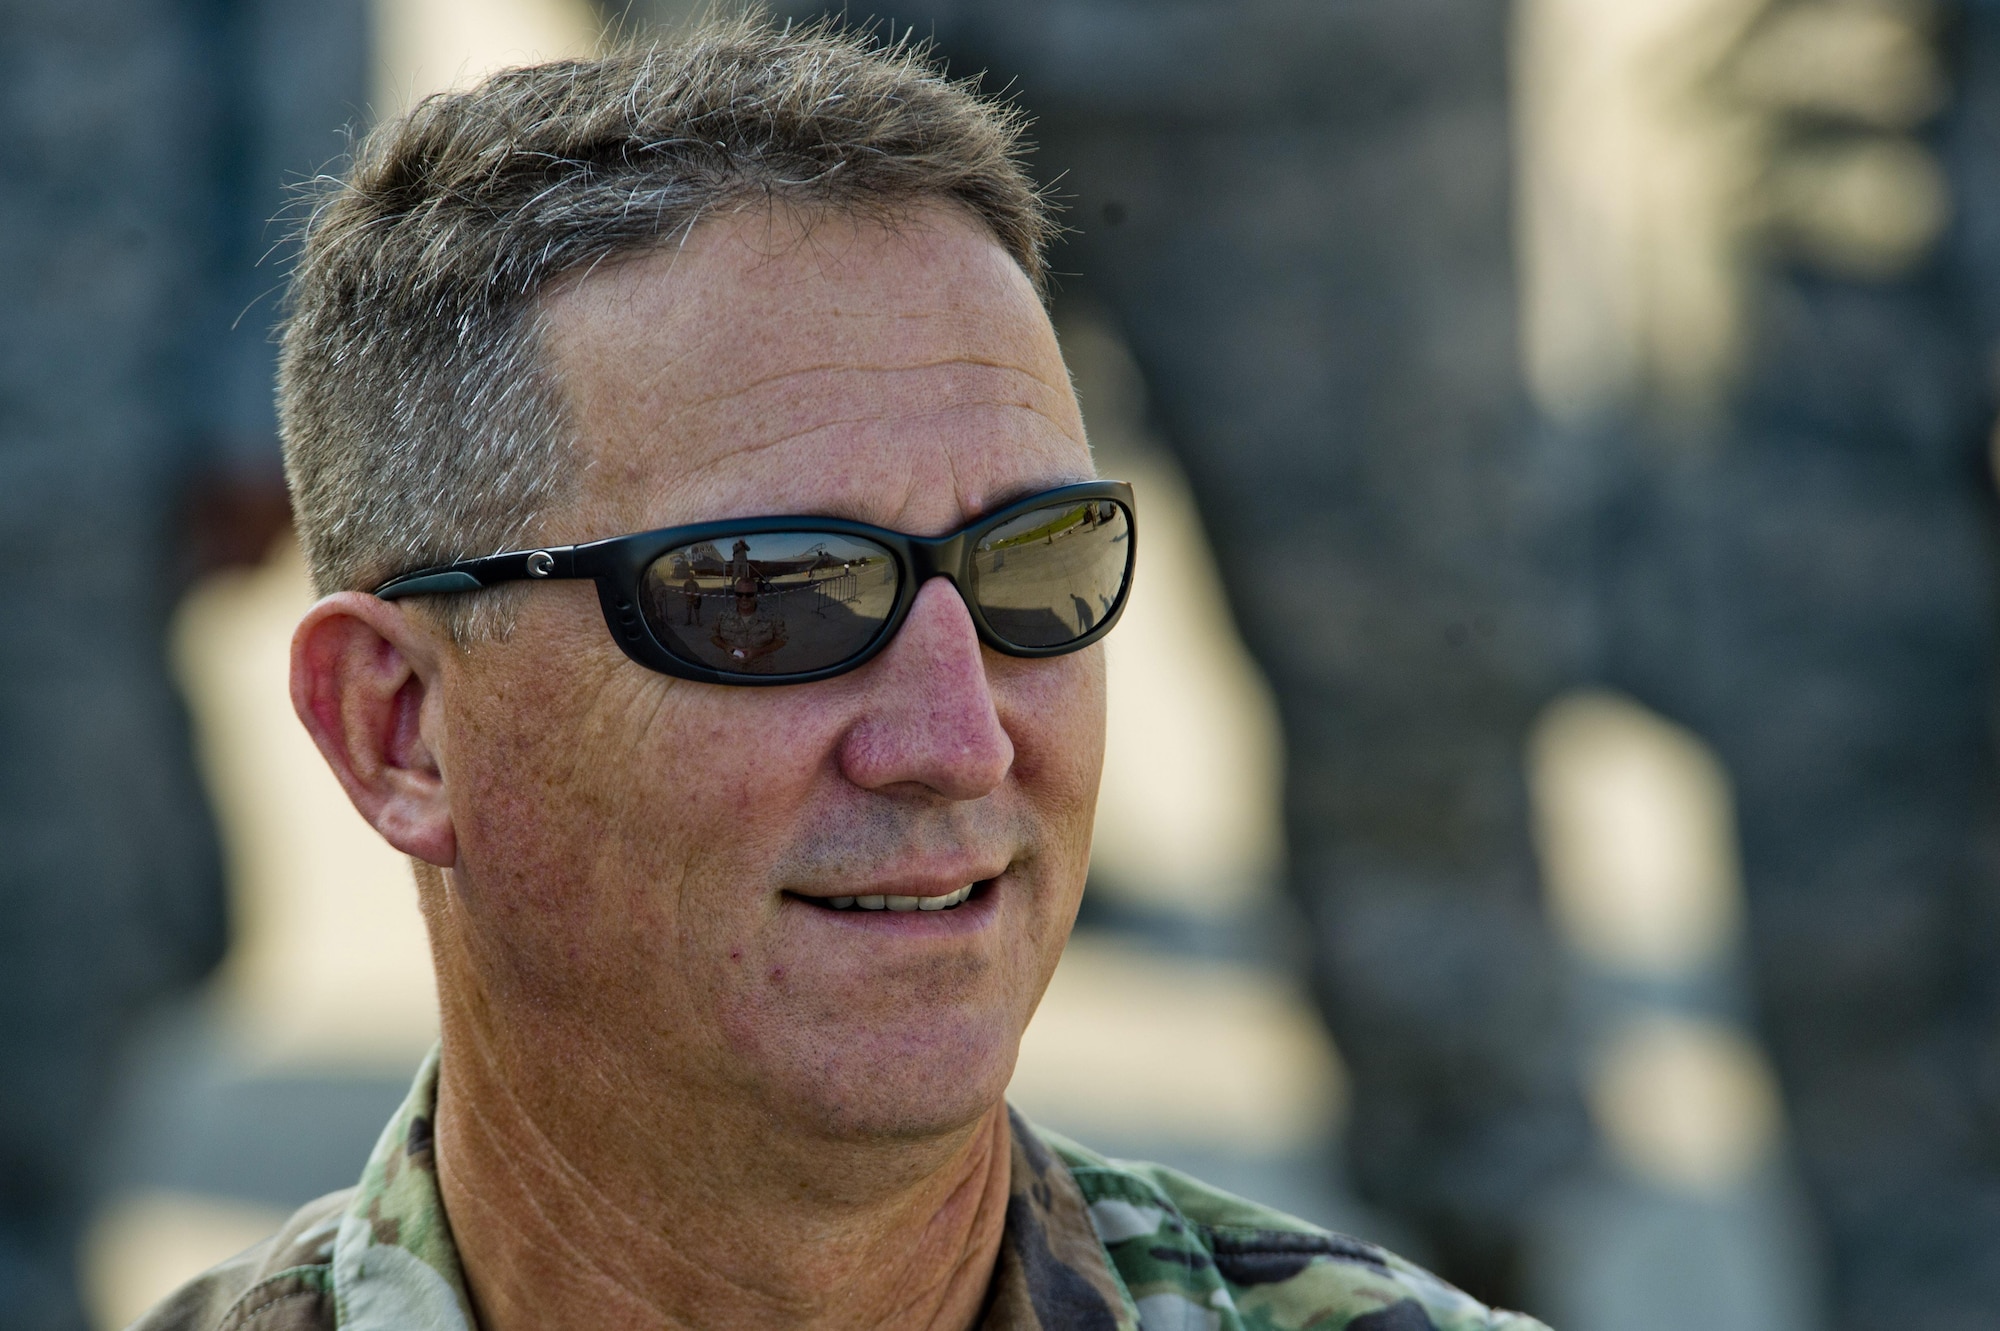 California Army National Guard Maj. Gen. Matthew Beevers, deputy adjutant general of the California Military Department, smiles while receiving a briefing during the Romanian air force's 71st Air Base's air show and open house at Campia Turzii, Romania, July 23, 2016. The aviation demonstration took place during the middle of the U.S. Air Force's 194th Expeditionary Fighter Squadron six-month long theater security package deployment to Europe in support of Operation Atlantic Resolve, which aims to bolster the U.S.'s continued commitment to the collective security of NATO and dedication to the enduring peace and stability in the region. The unit, comprised of more than 200 CANG Airmen from the 144th Fighter Wing at Fresno ANG Base, Calif., as well as U.S. Air Force Airmen from the 52nd Fighter Wing at Spangdahlem Air Base, Germany, piloted, maintained and supported the deployment of 12 F-15Cs Eagle fighter aircraft throughout nations like Romania, Iceland, the United Kingdom, the Netherlands, Estonia and among others. The F-15Cs took to the skies alongside the 71st AB's MiG-21 fighter aircraft and Puma helicopters for both the airshow, the second engagement of its kind at Campia Turzii under Operation Atlantic Resolve, and the bilateral flight training, also known as Dacian Eagle 2016. (U.S. Air Force photo by Staff Sgt. Joe W. McFadden/Released)